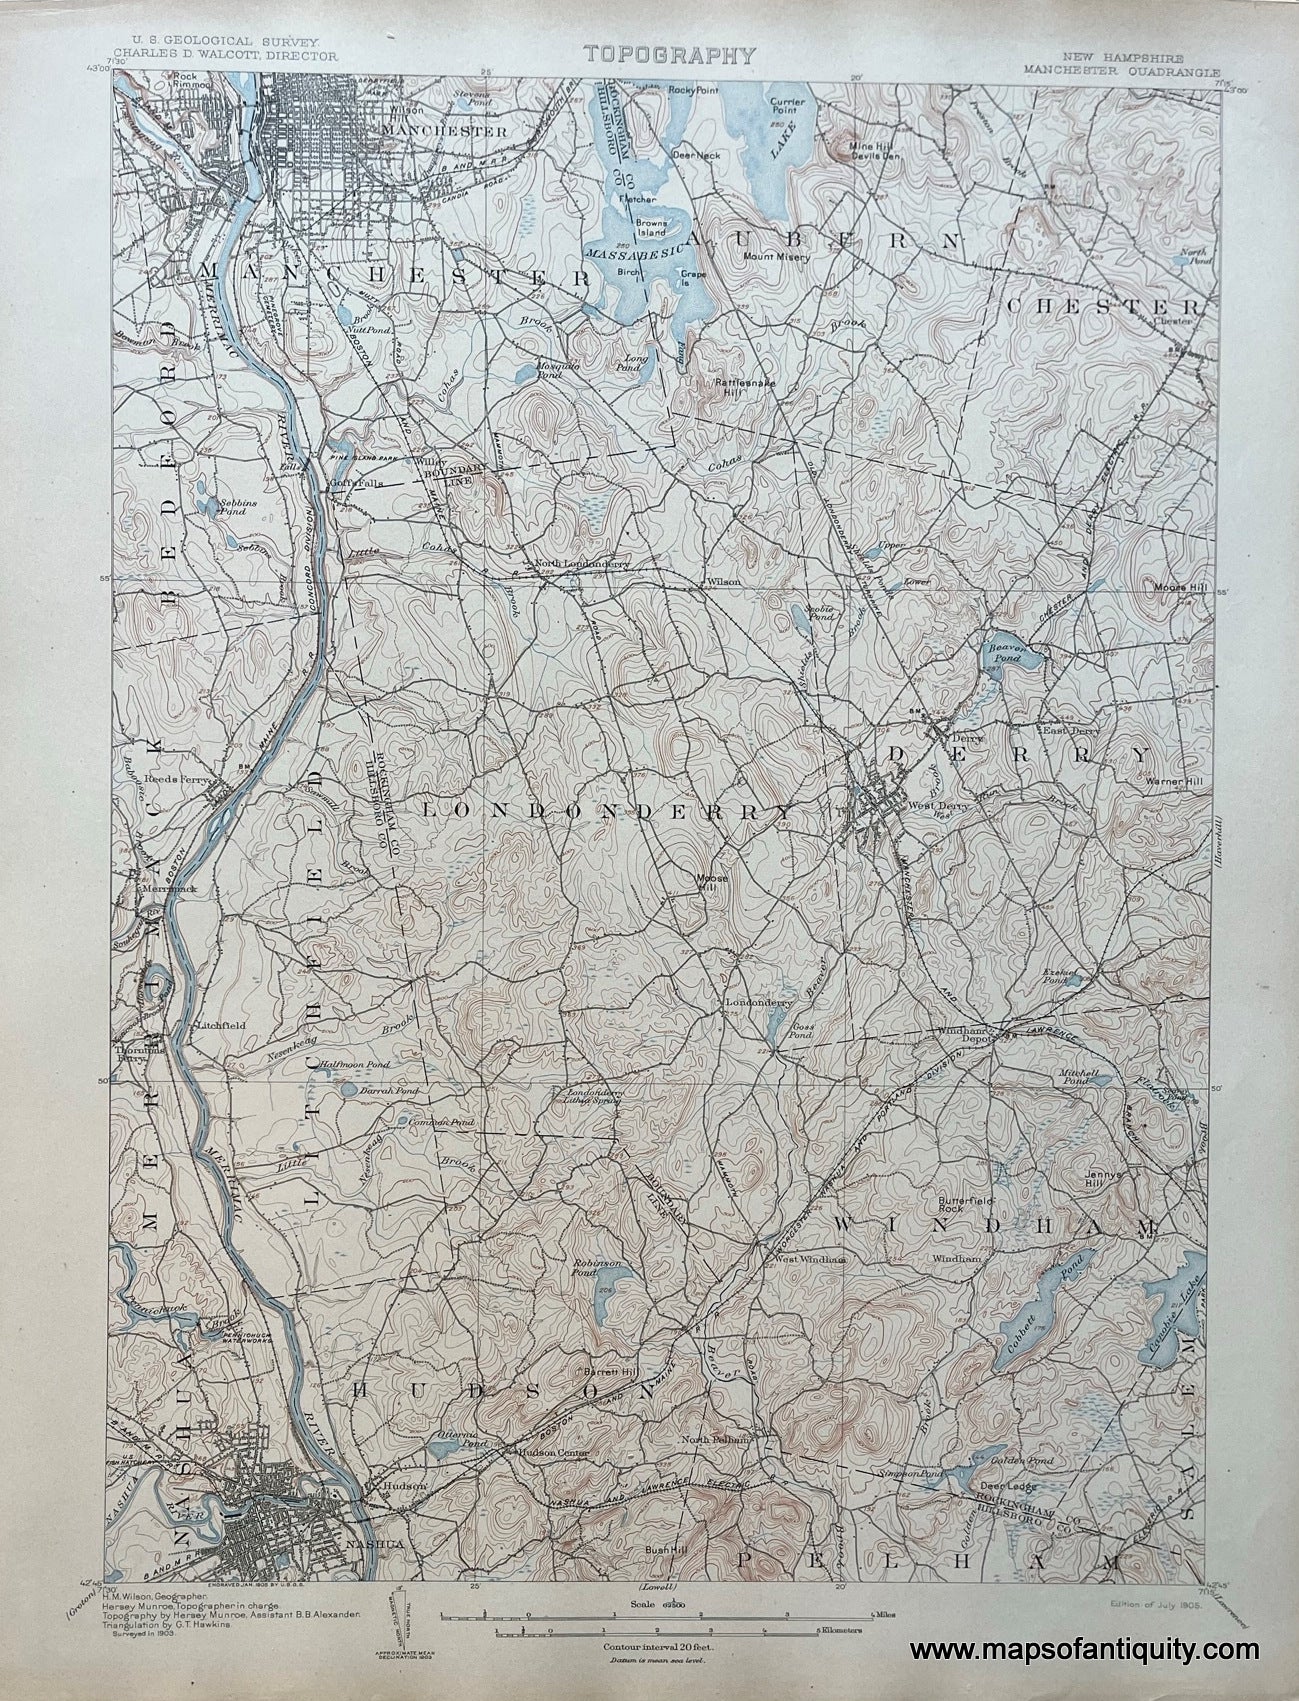 Genuine-Antique-Topographical-Map-NH-Manchester-Quadrangle-Topo-Map-1905-USGS-U-S--Geological-Survey-Maps-Of-Antiquity